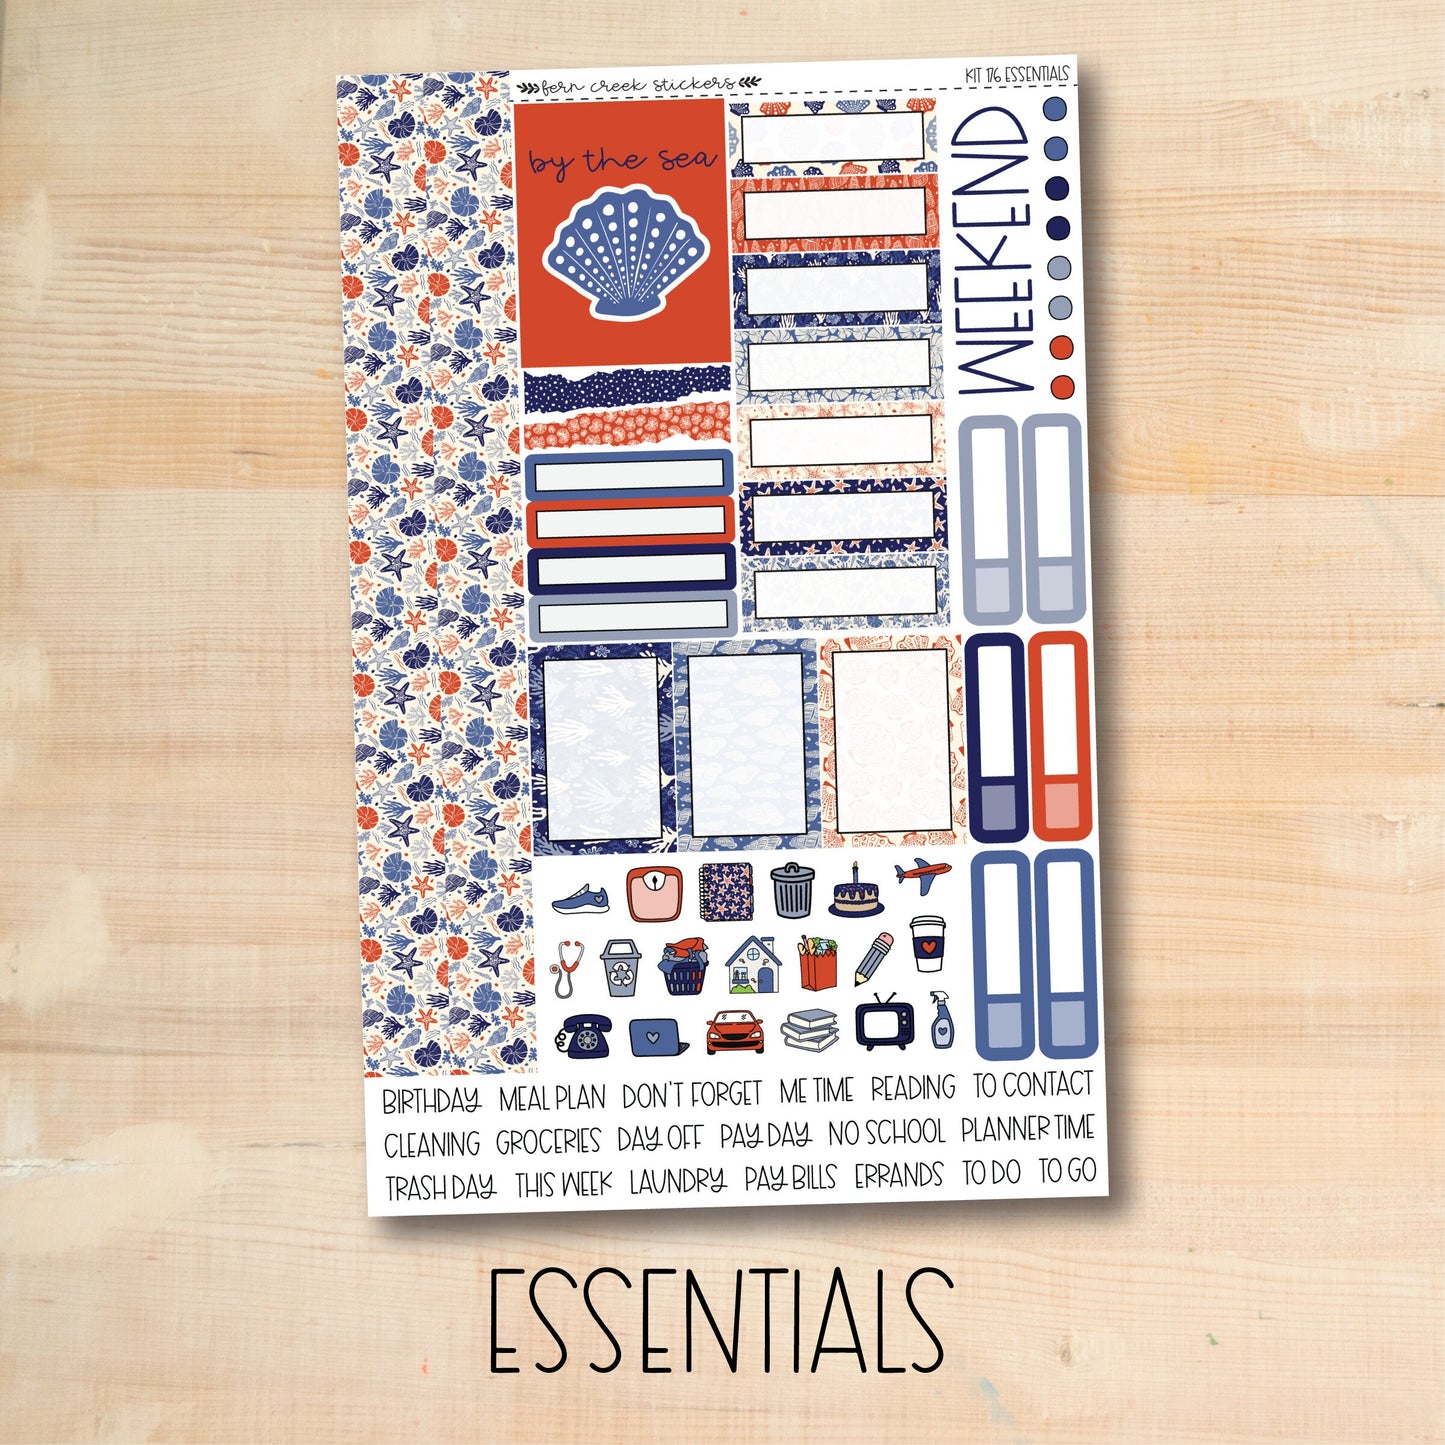 KIT-176 || COASTAL weekly planner kit for Erin Condren, Plum Paper, MakseLife and more!